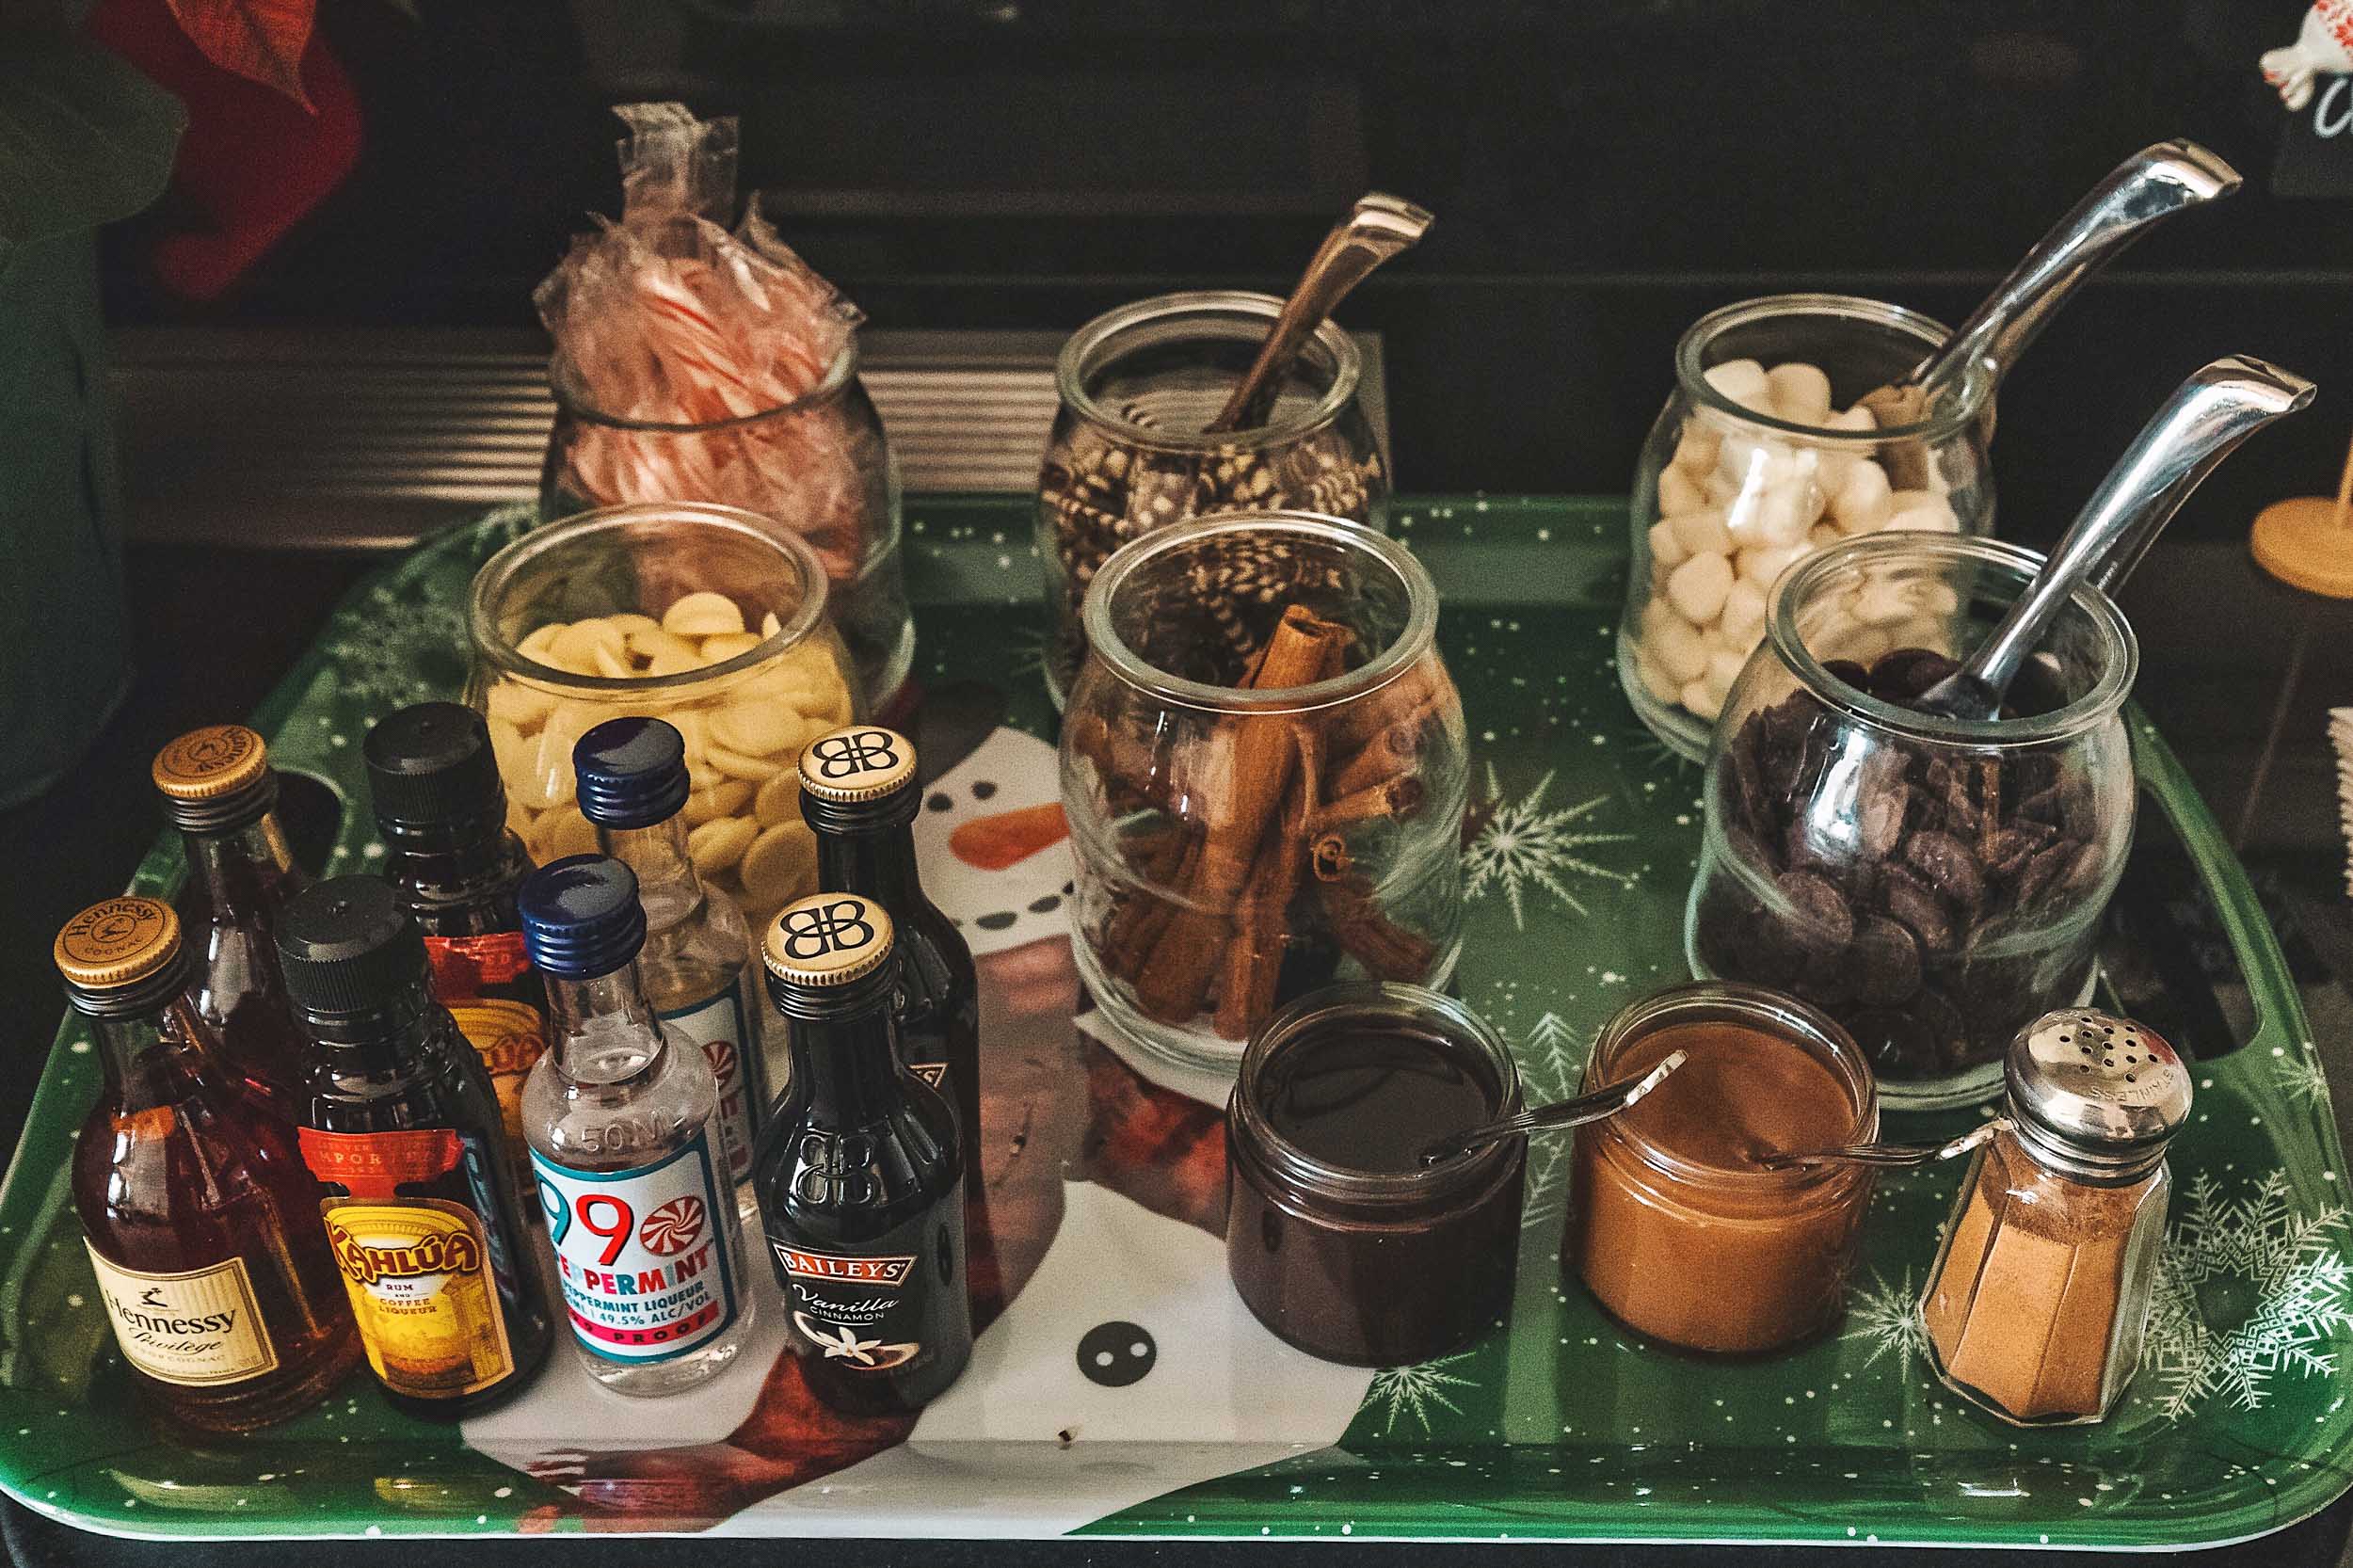 Our DIY hot chocolate bar (adult beverages included) inside the Santa Suite at The Fairmont San Francisco